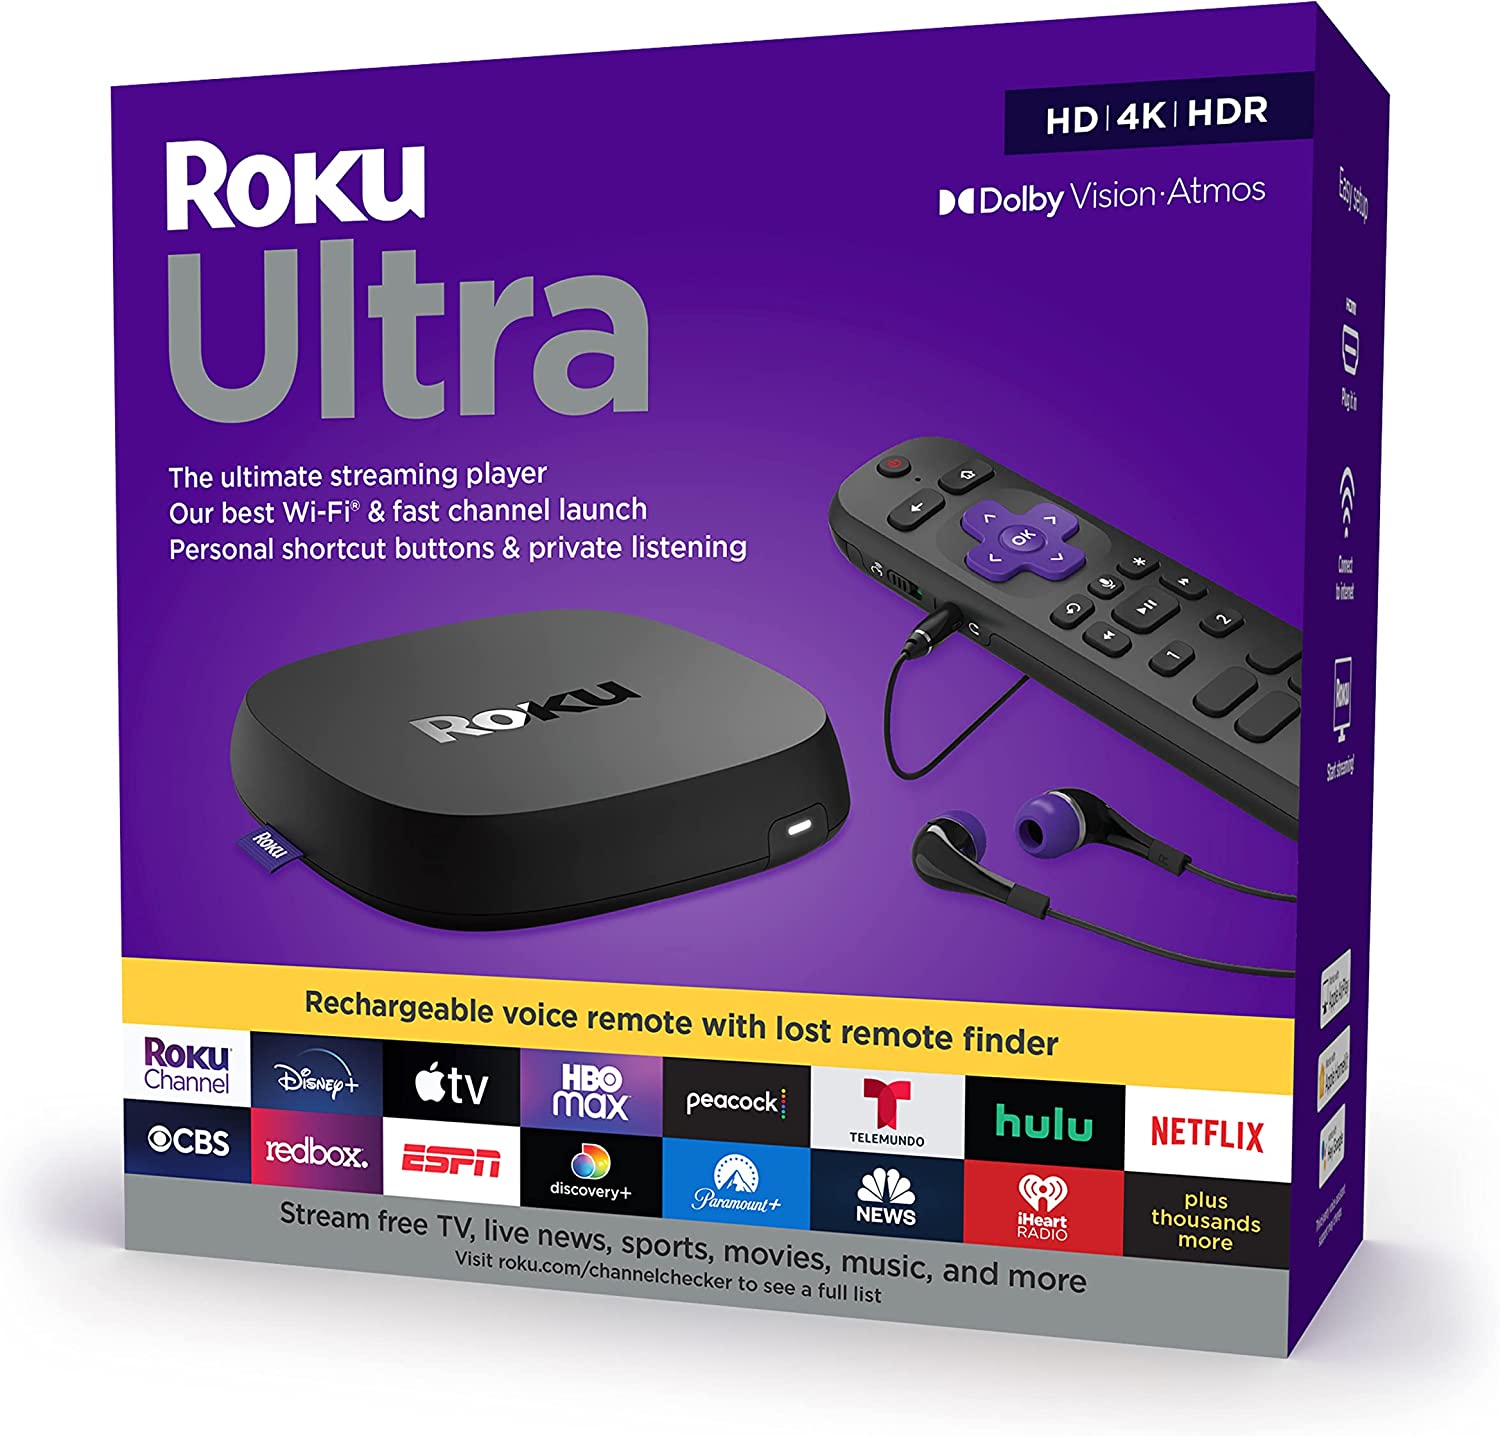 Giveaway! Enter Now to Win a 2022 Roku Ultra, $100 Netflix Gift Card, Mohu Antenna & $100 in Hulu Gift Cards! May 2023 Giveaway!